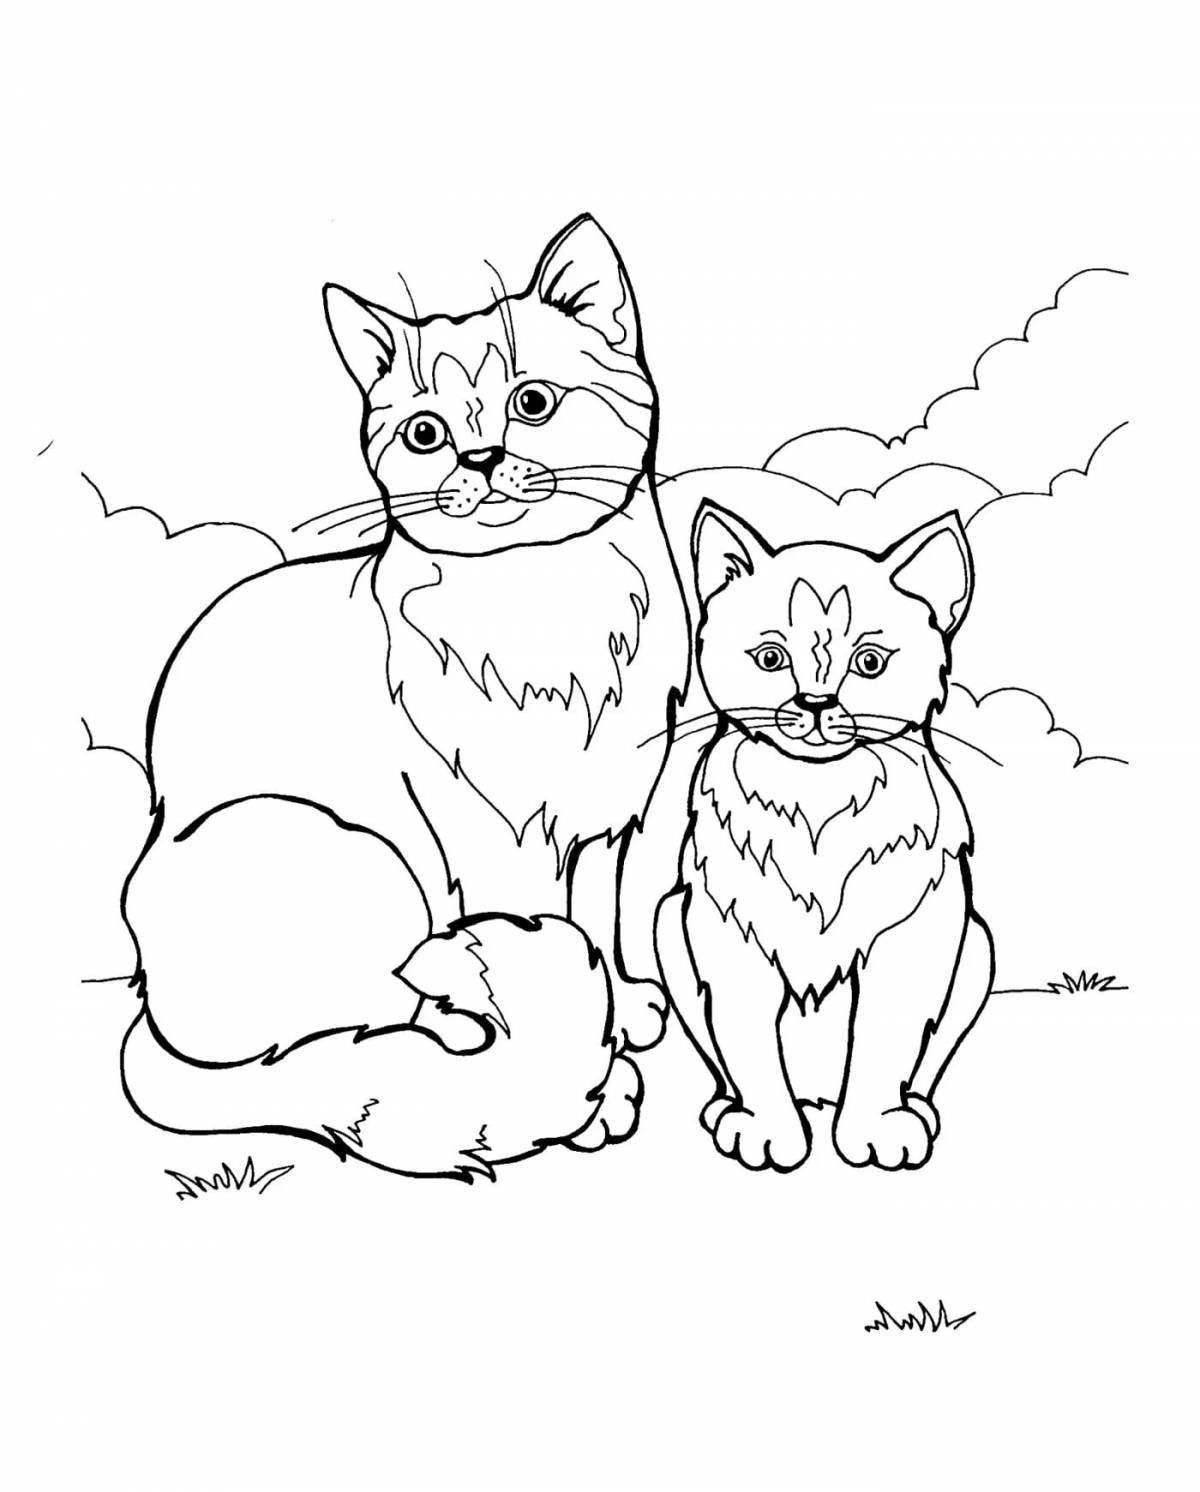 Coloring page bright family of cats